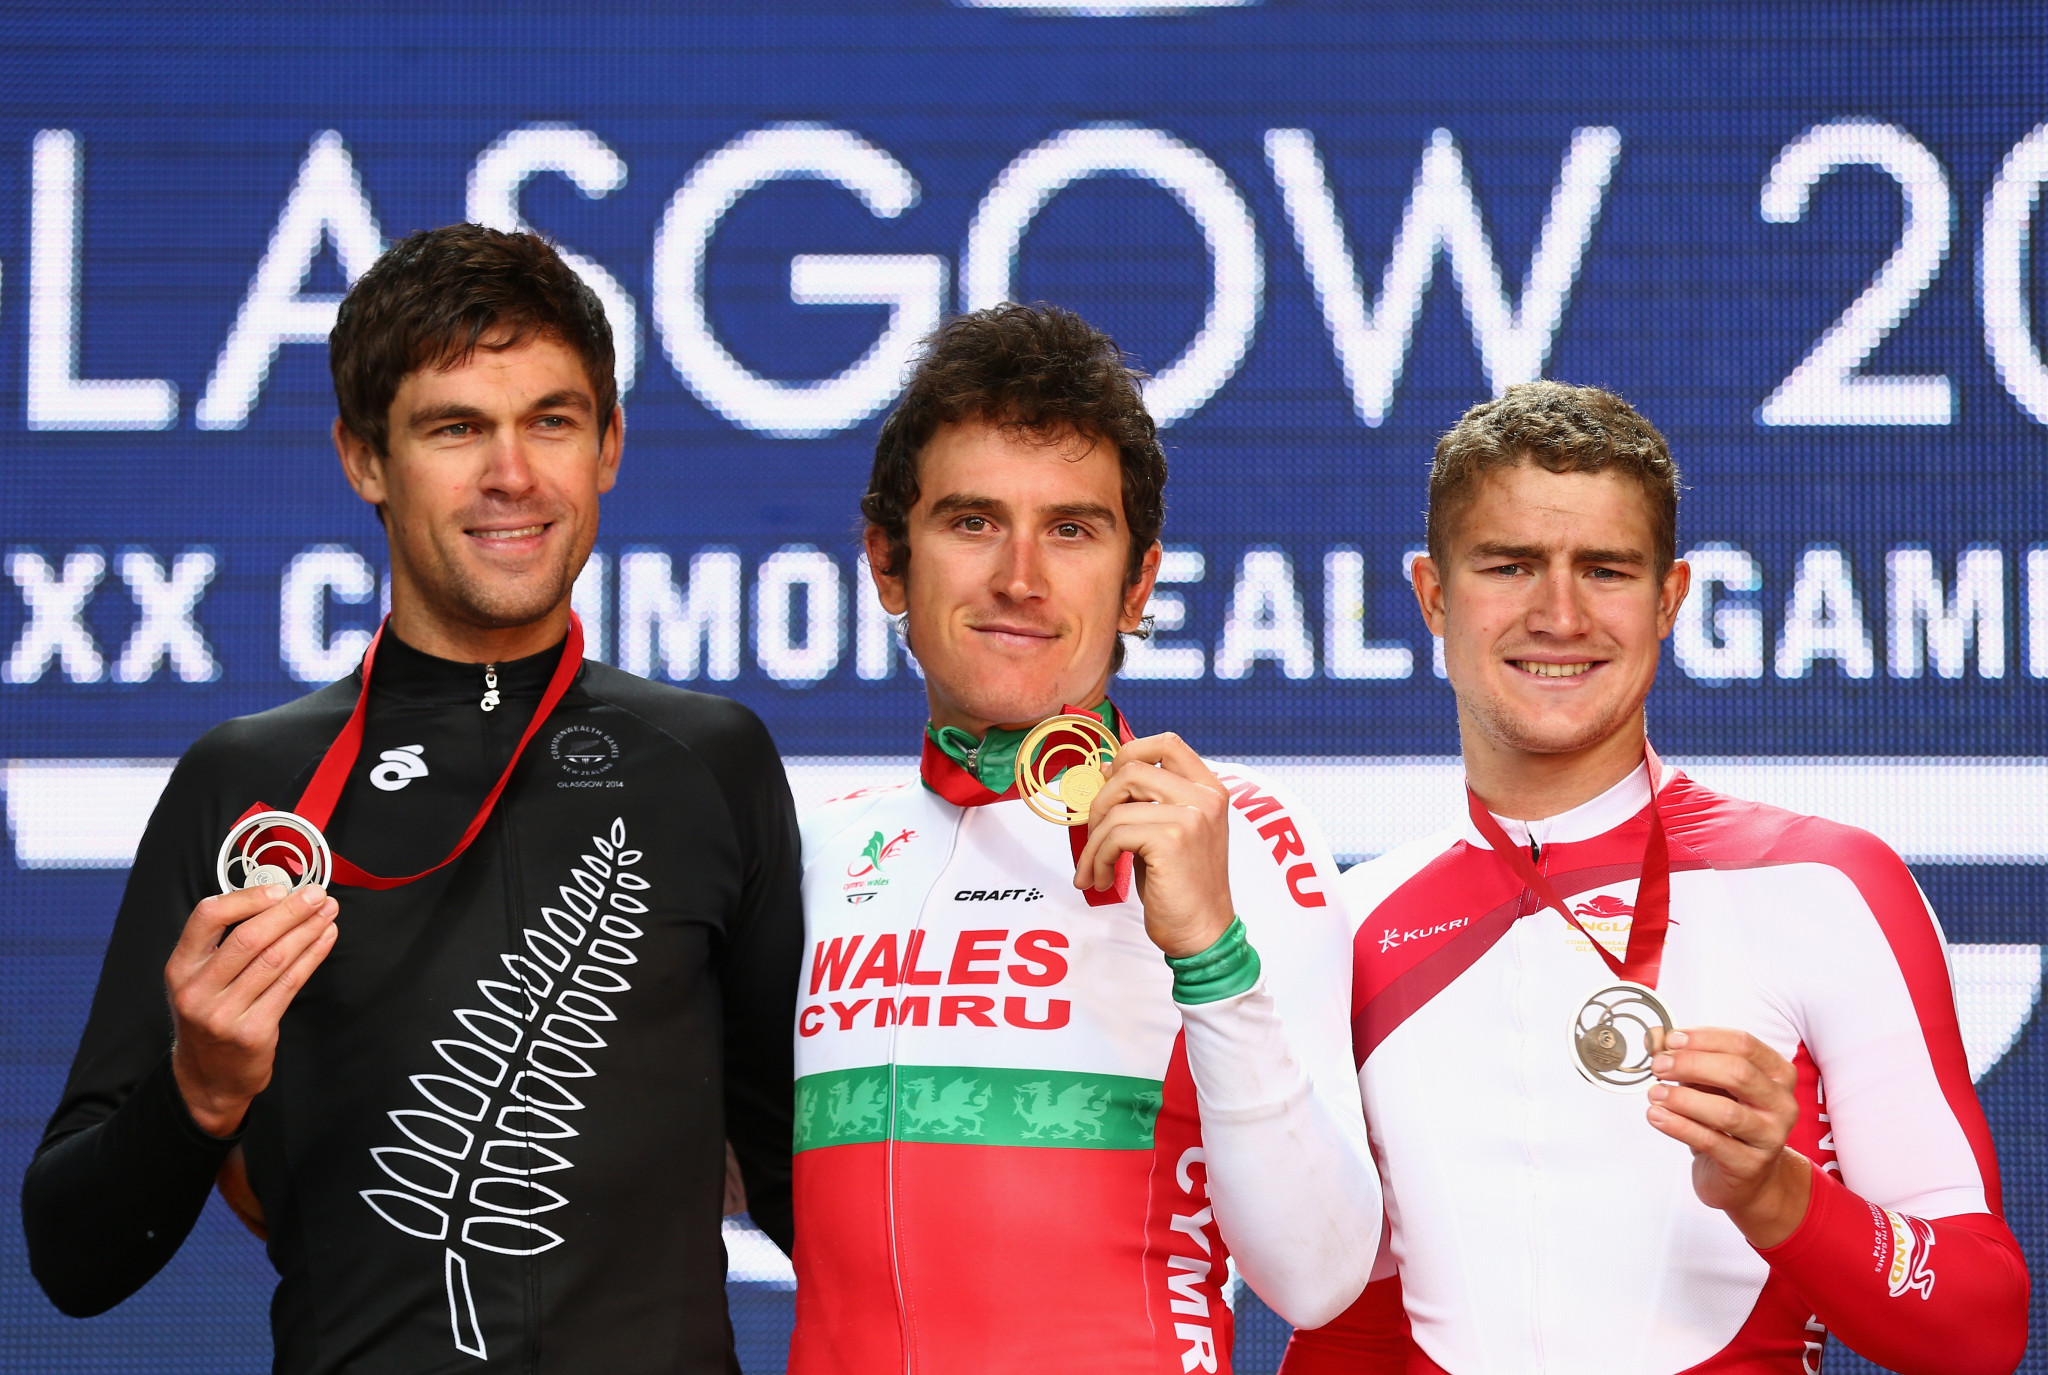 Jack Thomas, centre, won a gold medal at the 2014 Commonwealth Games in Glasgow ©Getty Images